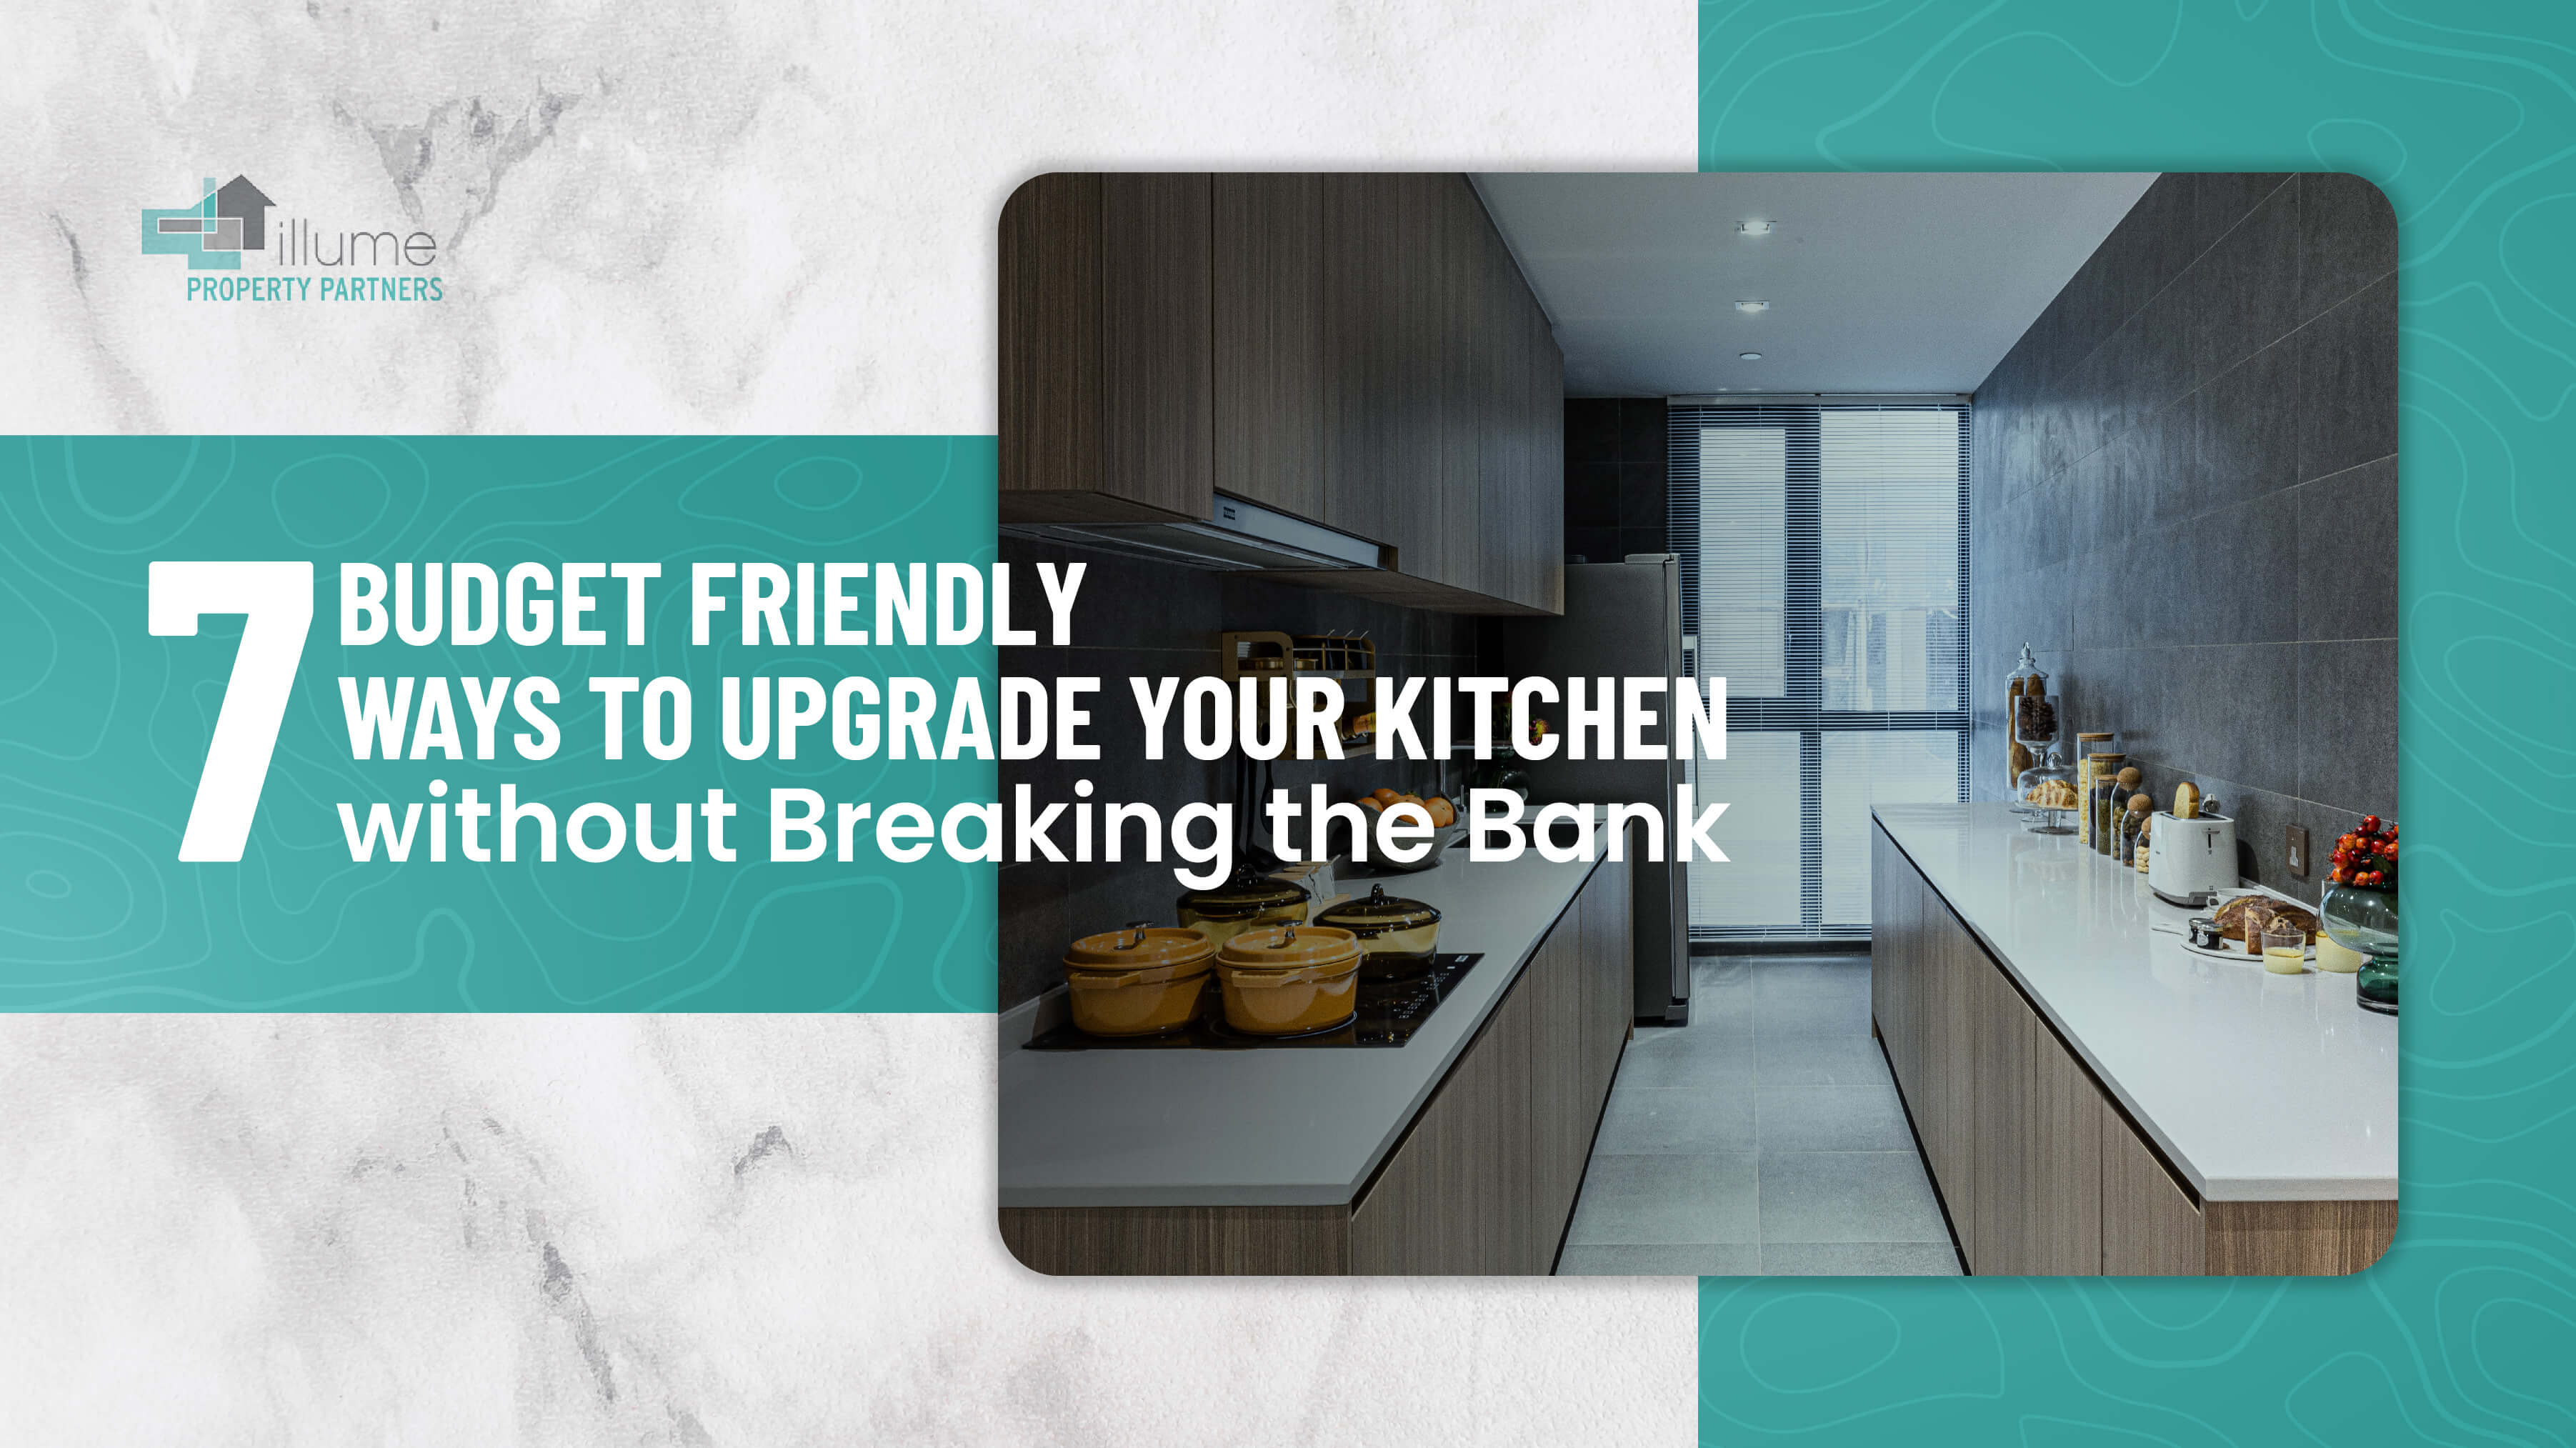 7 Budget Friendly Ways to Upgrade Your Kitchen Without Breaking the Bank